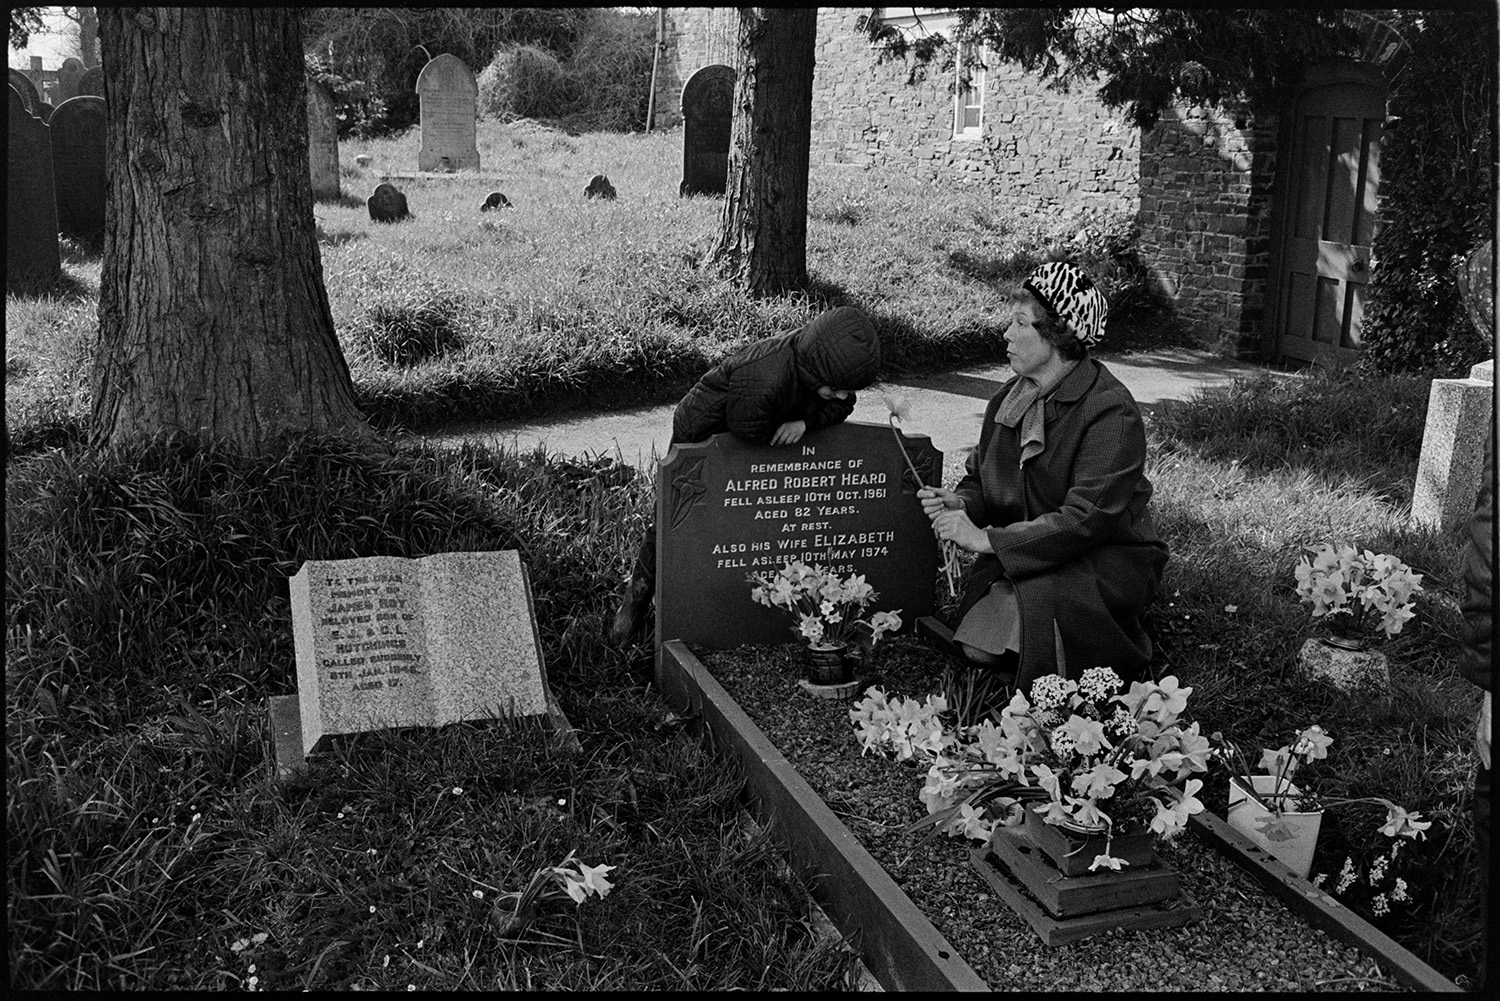 People putting flowers on graves at Easter time. 
[A woman and child putting flowers on the grave of Alfred Heard and Elizabeth Geard in Dolton Churchyard at Easter. The woman is holding a daffodil. Trees and gravestones are visible in the background.]